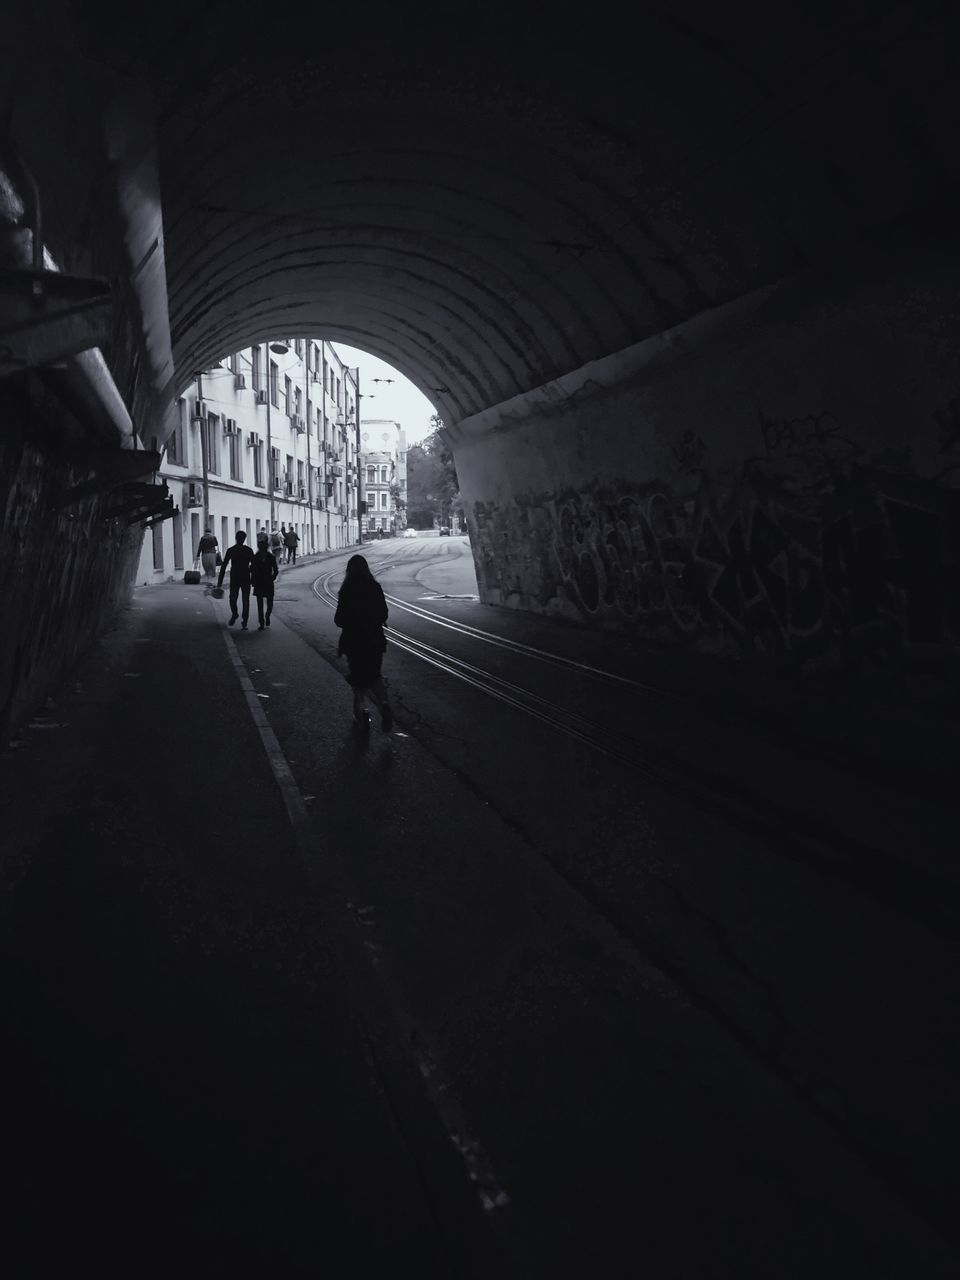 PEOPLE IN TUNNEL